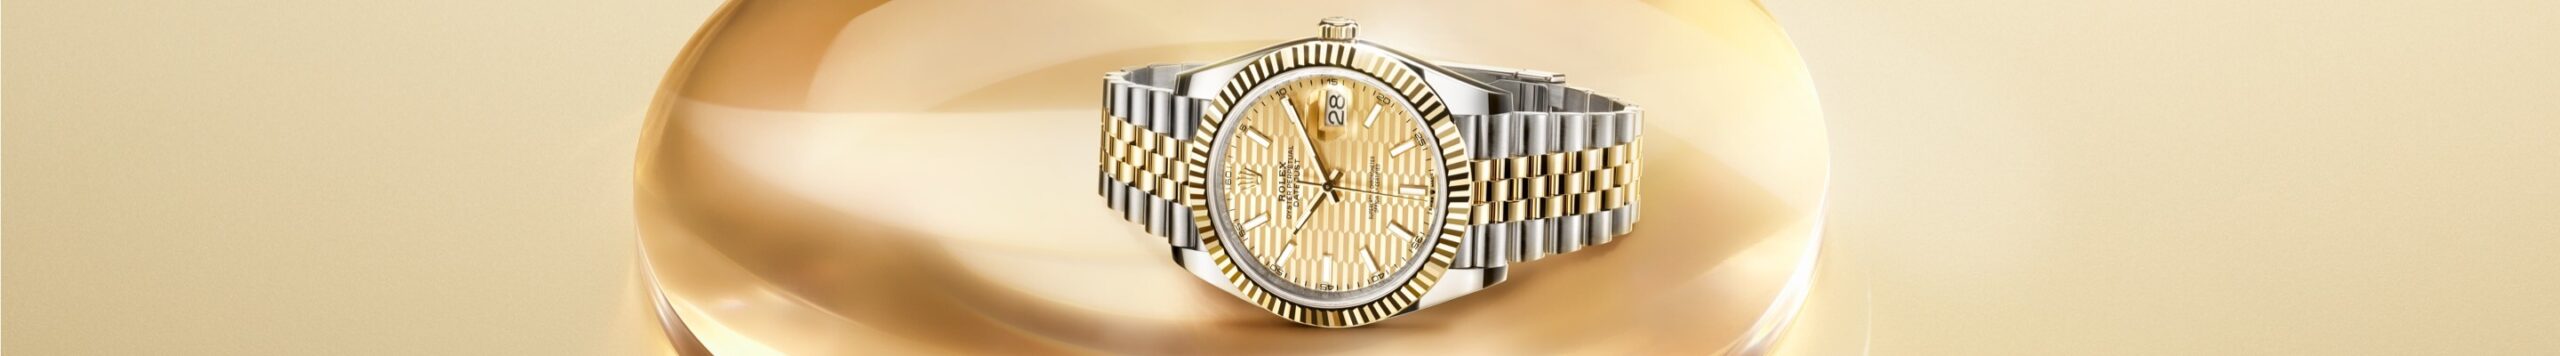 Luxury wristwatch with a gold band and embellished face displayed against a soft golden background.